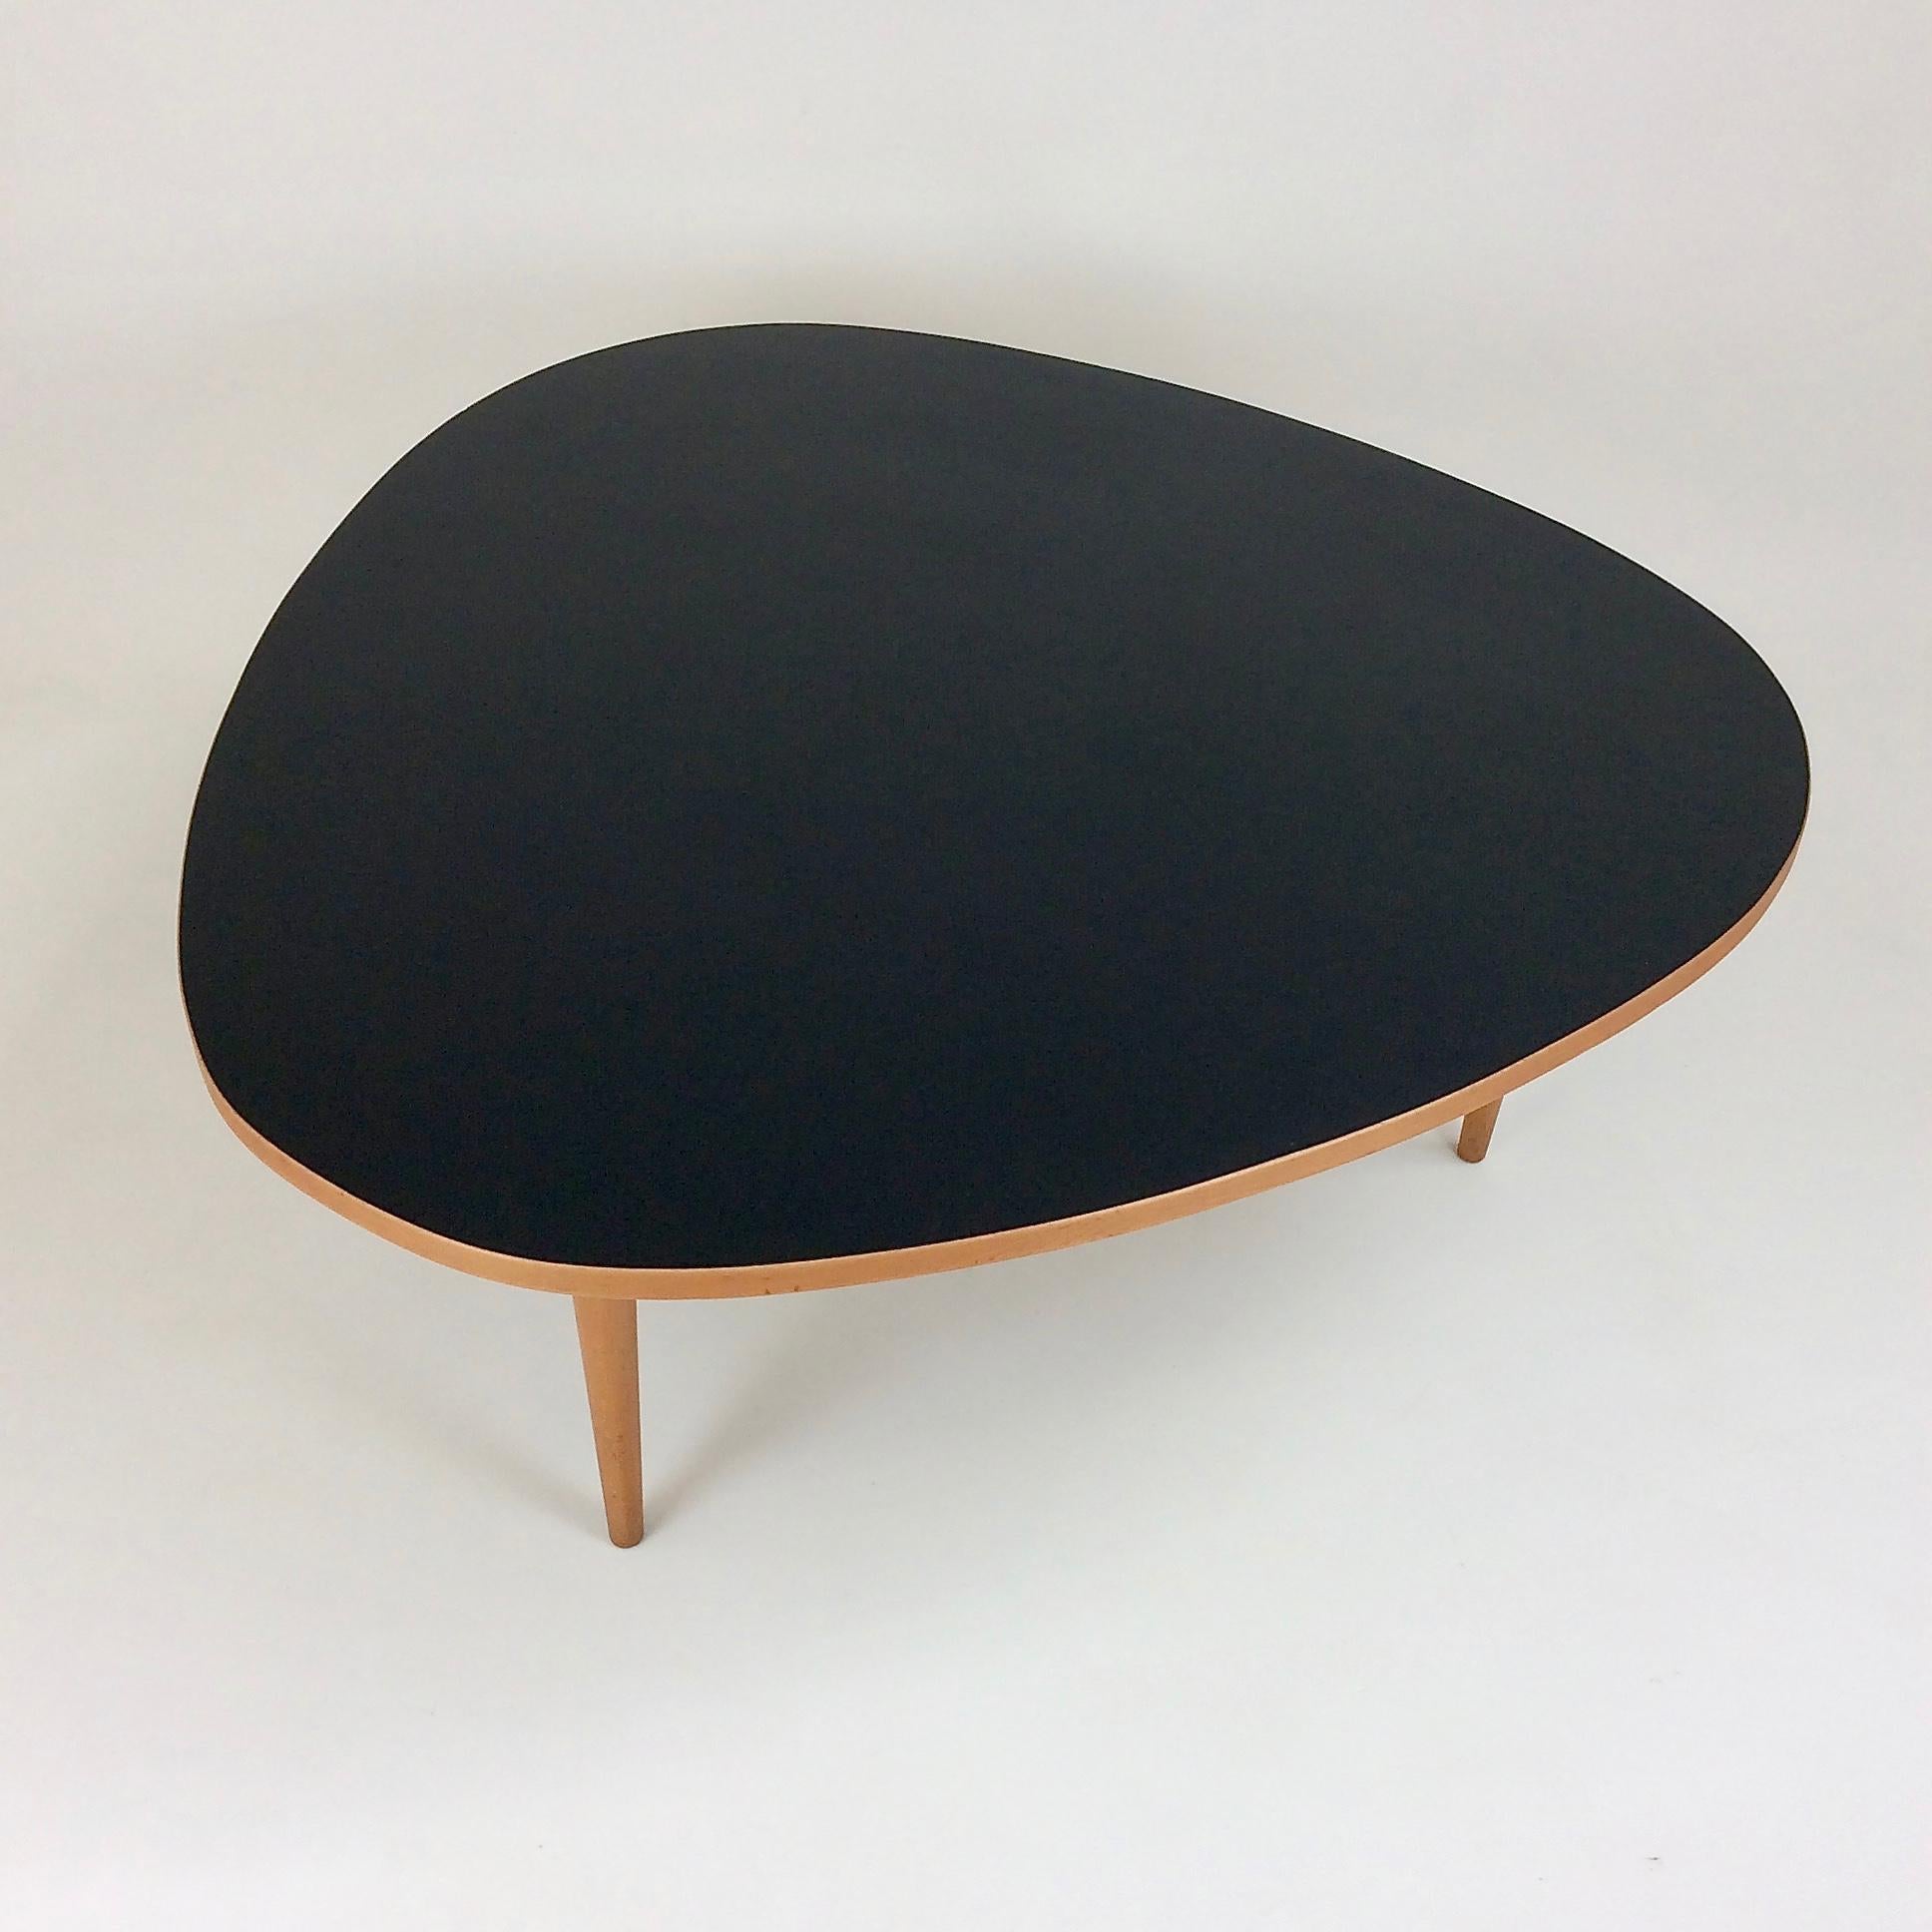 Max Bill three circles coffee table for Wohnbedarf, circa 1950, Switzerland.
Mable wood and black linoleum.
Dimensions: 110 cm W, 110 cm D, 46 cm H.
Original condition.
All purchases are covered by our Buyer Protection Guarantee.
 
 
  